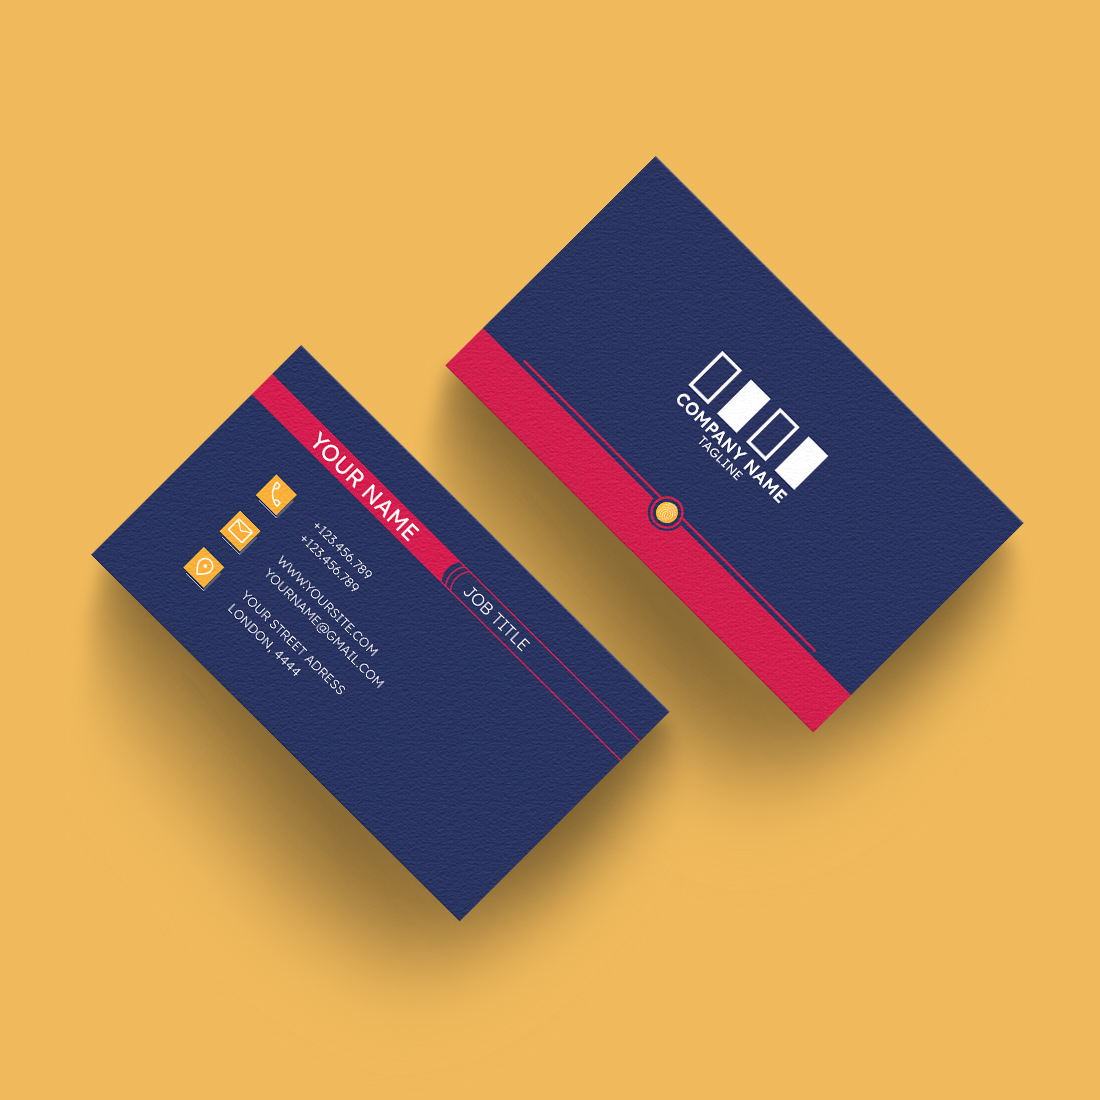 Modern Corporate Business Card cover image.